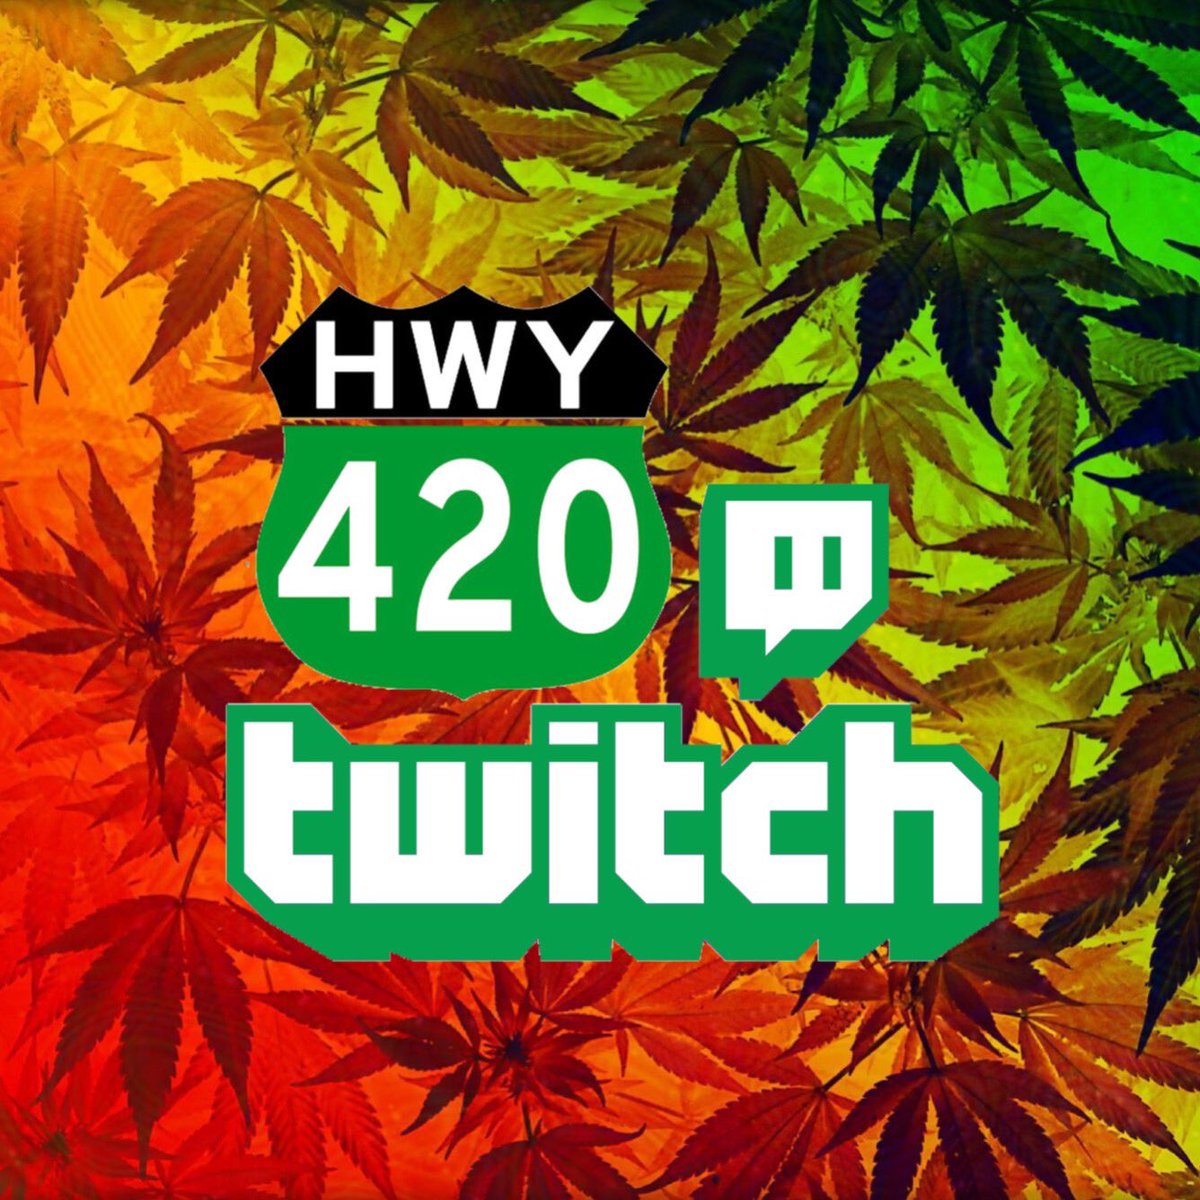 Promotion #Sunday✌️

1. RT, like
2. Post your #Twitch/#youtube/#kick
3. Follow @bayleigh_jones1 
4. LET'S GROW

#SmallStreamersConnect
#SupportSmallStreamers 
#Twitchstream
@SupStreamers #SupportSmallStreams @ivykilla #CannabisCommunity #twitchcommunity #420twitch #WeedLovers